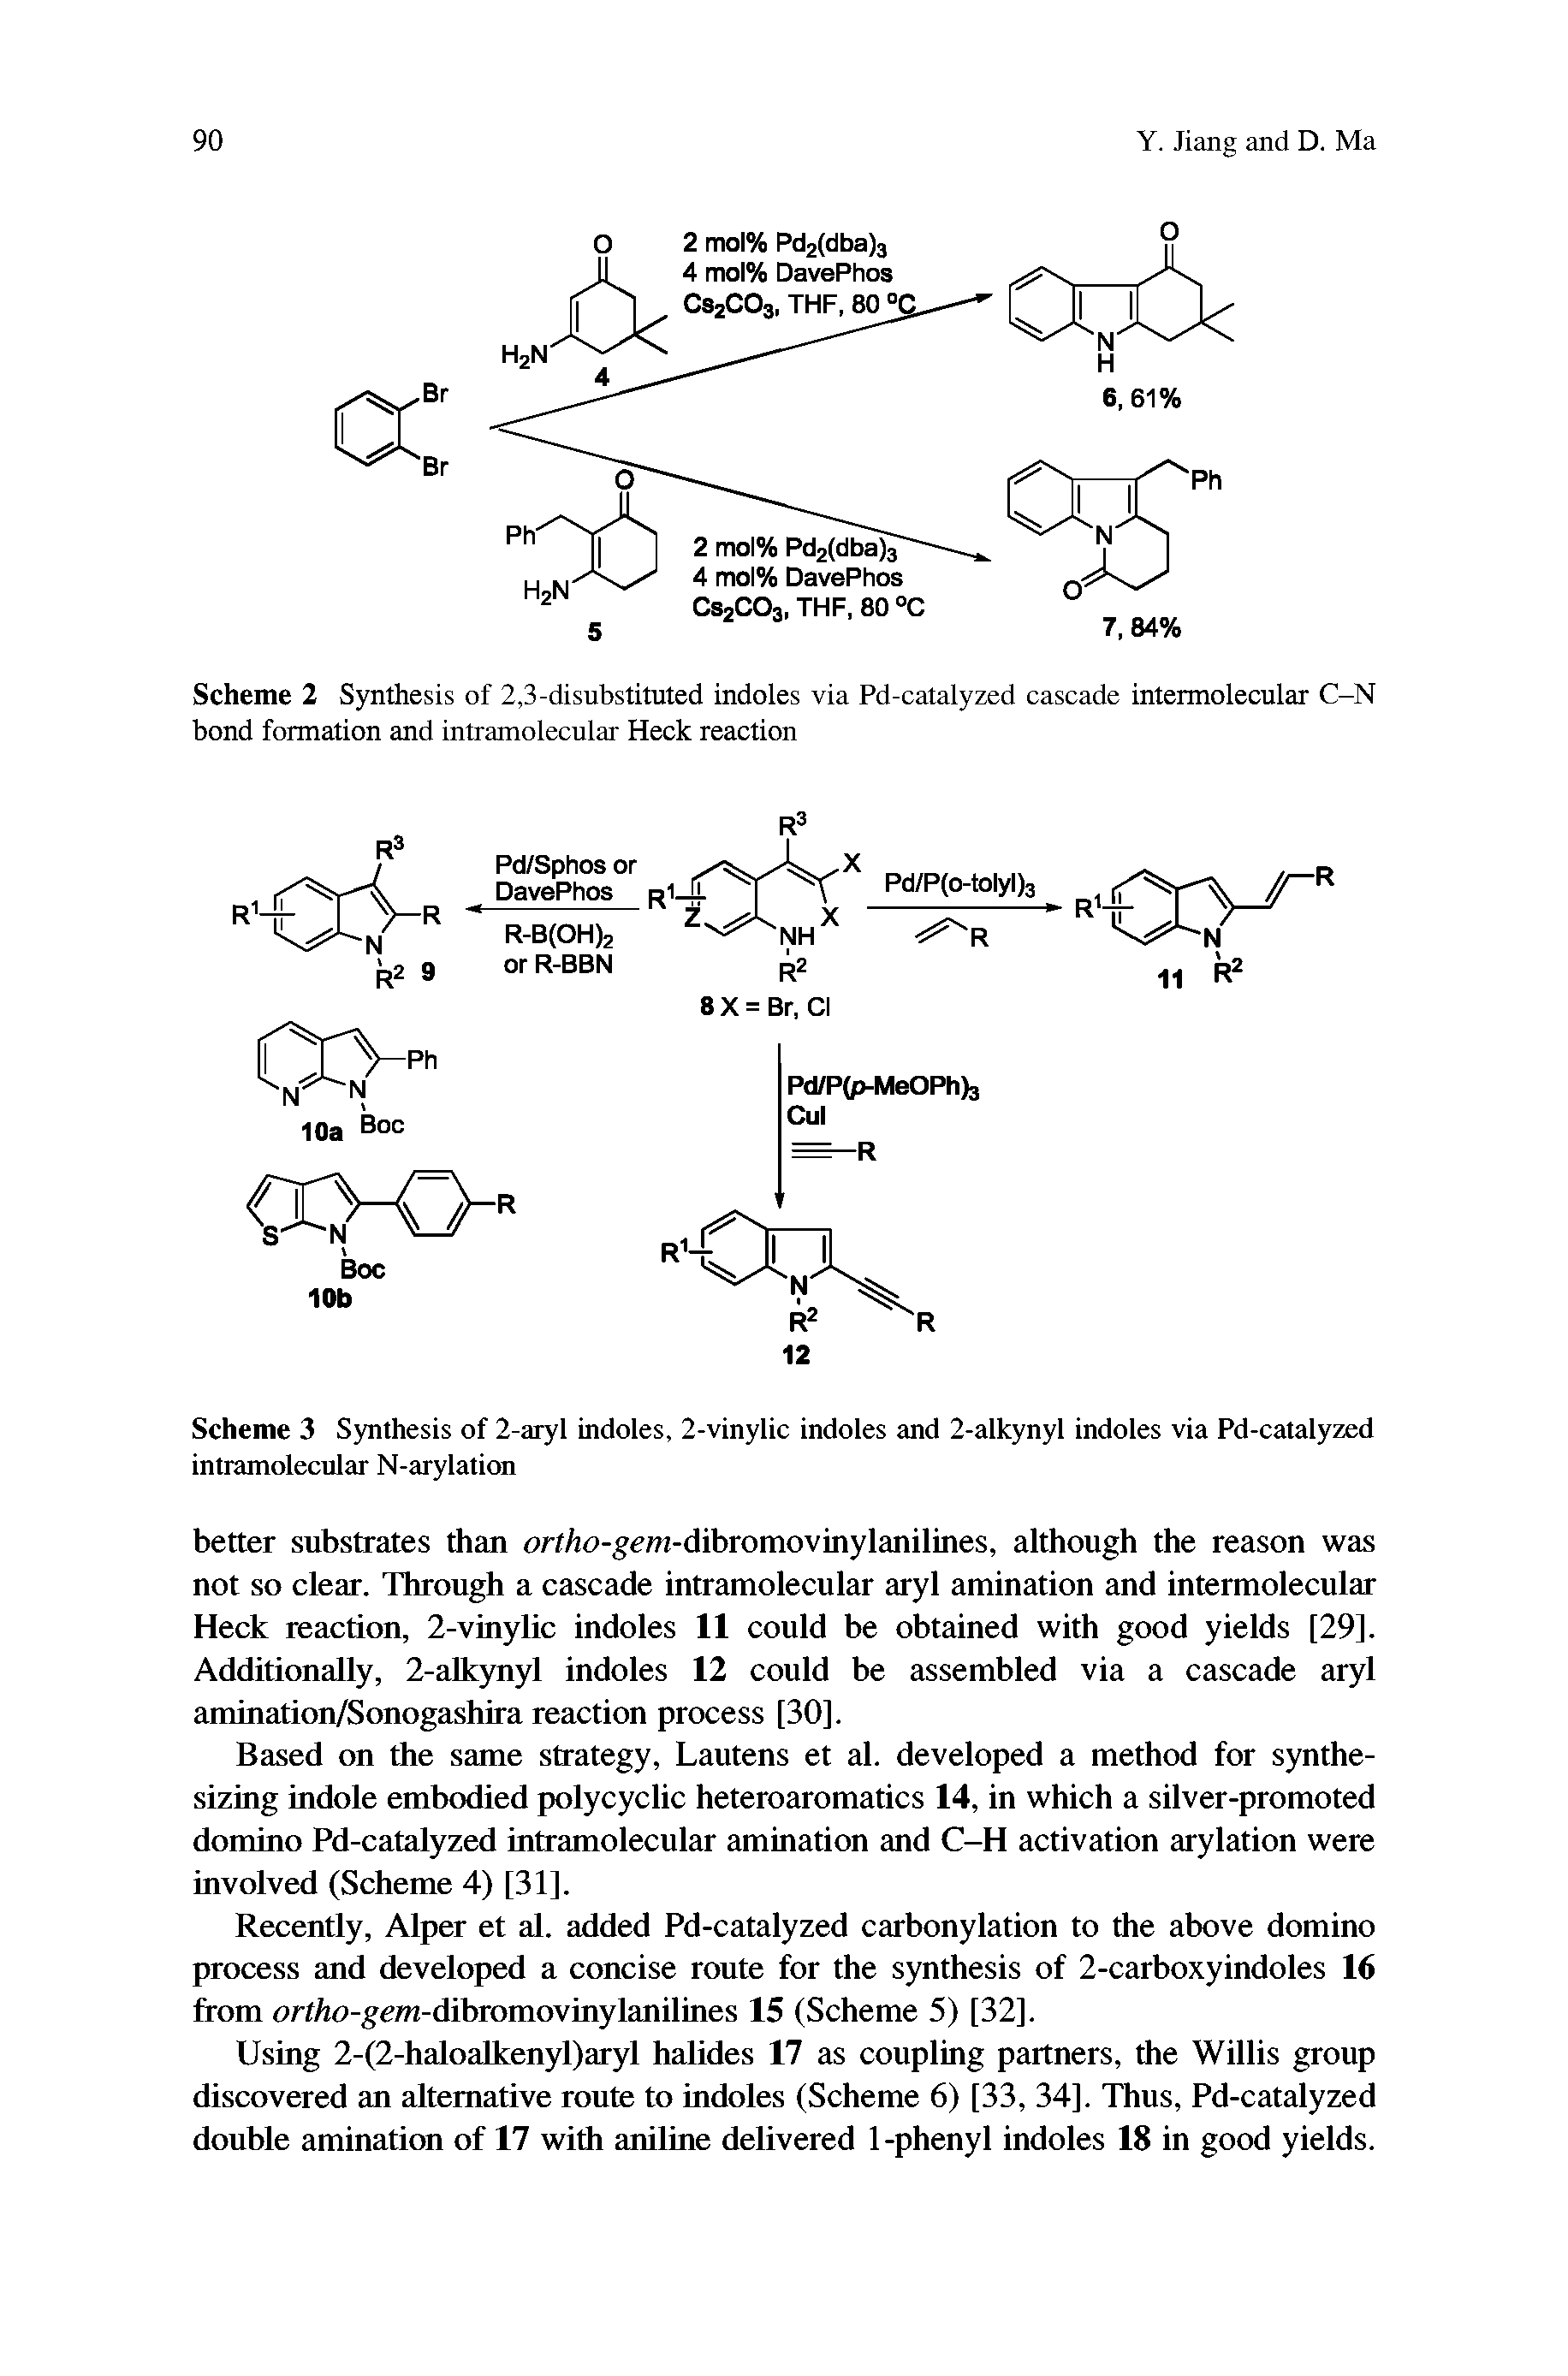 Scheme 2 Synthesis of 2,3-disubstituted indoles via Pd-catalyzed cascade inteimolecular C-N bond formation and intramolecular Heck reaction...